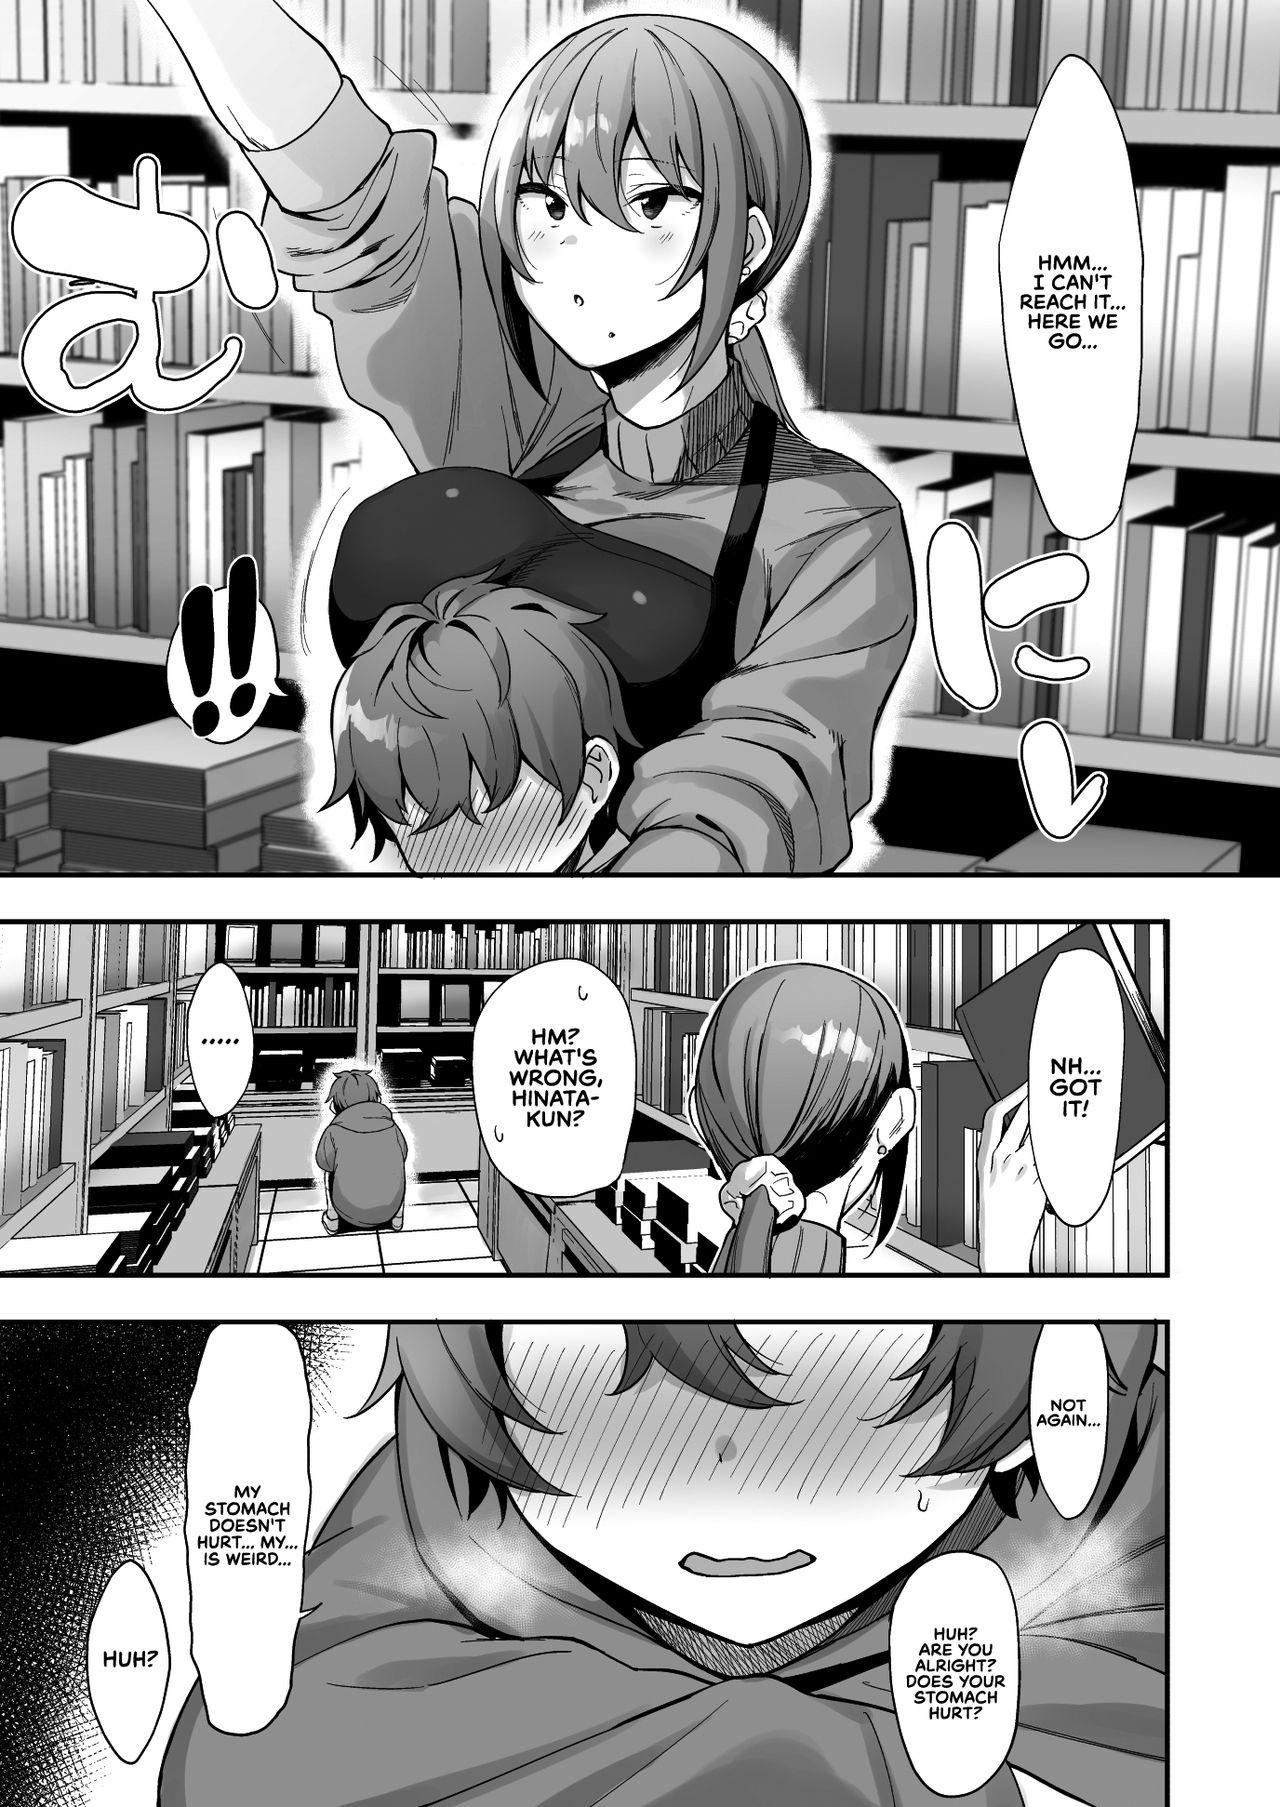 Slut Furuhonya no Onee-san to | With The Lady From The Used Book Shop - Original Letsdoeit - Page 8